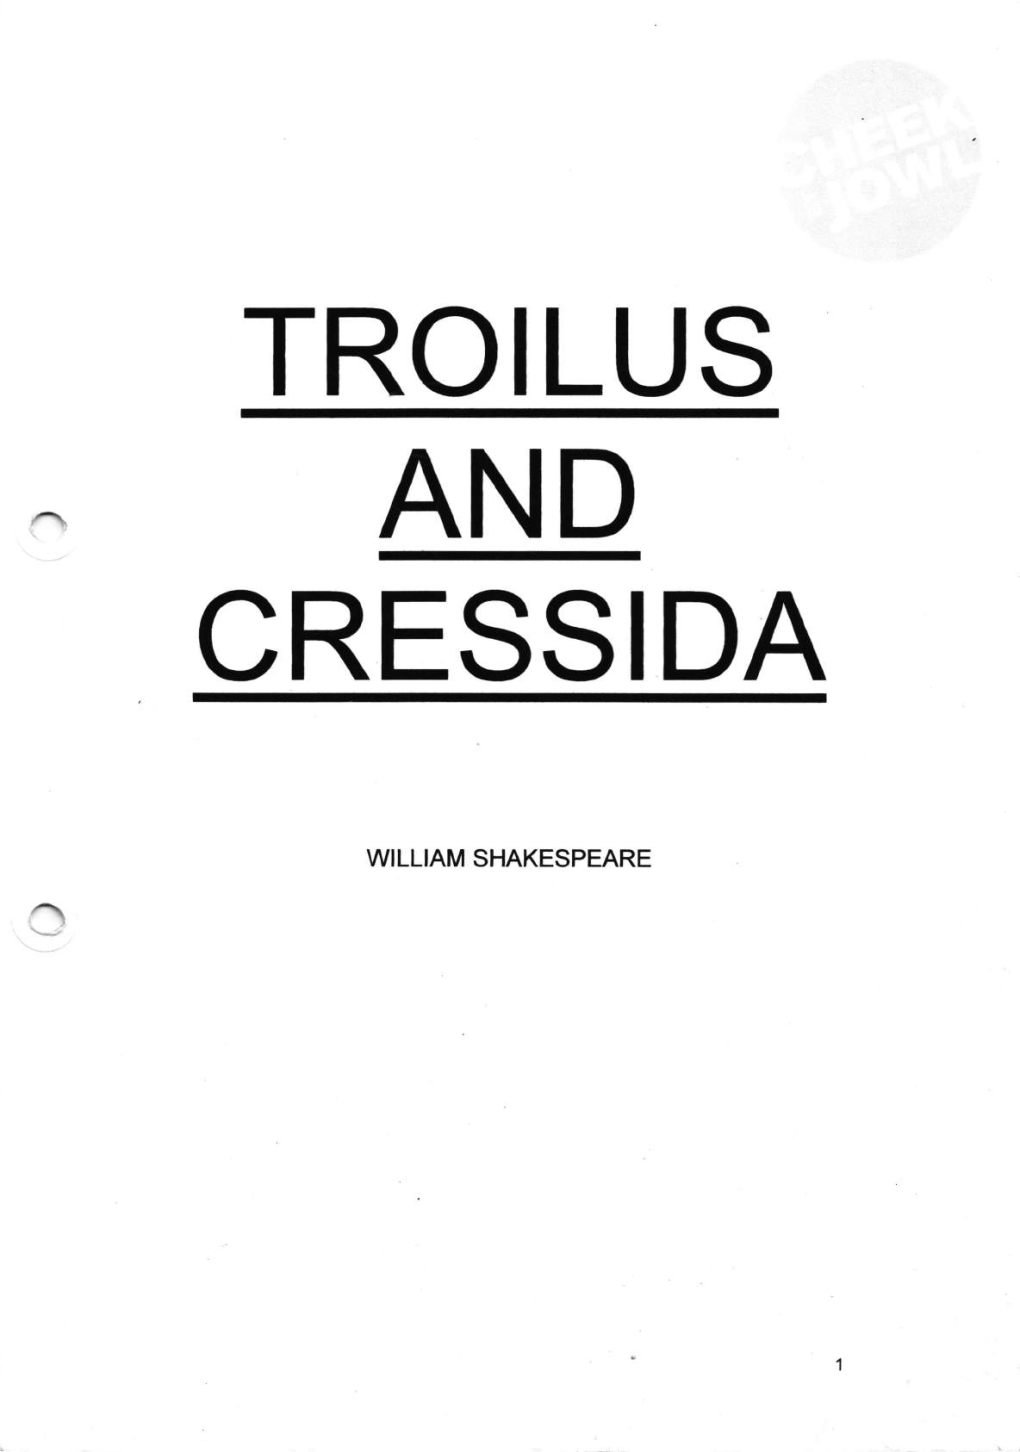 Prompt Script for Cheek by Jowl's 2008 Production of Troilus And